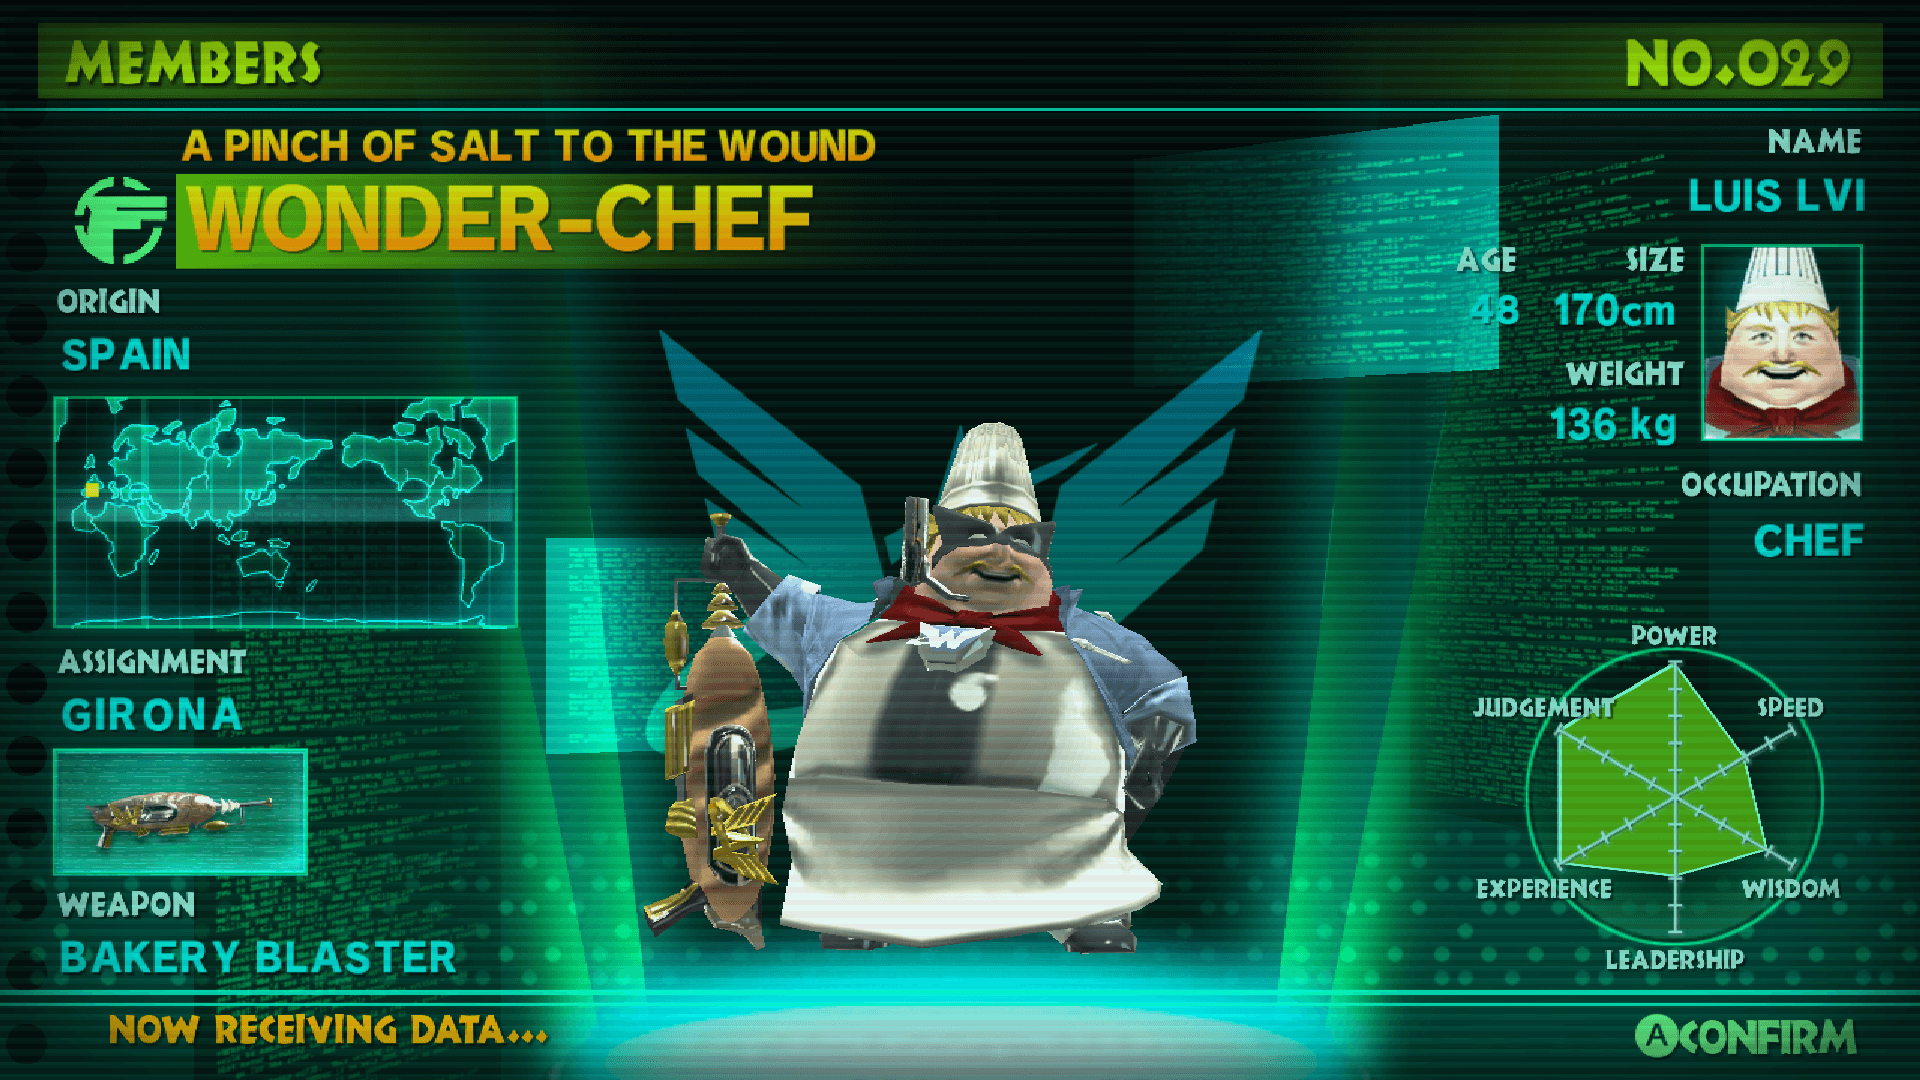 A picture of the Hero Wonder Chef